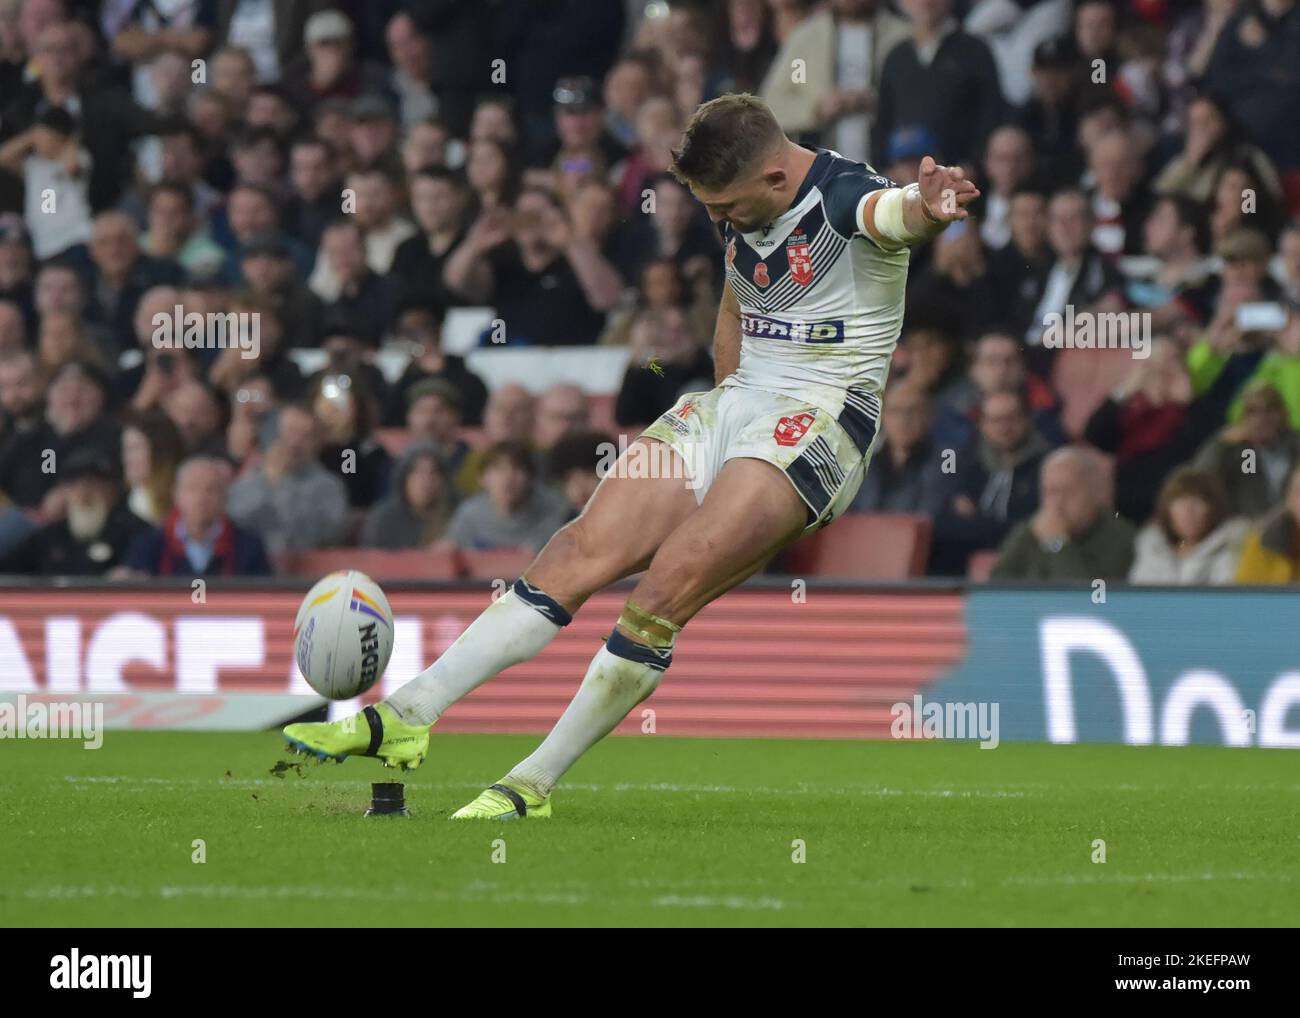 London, UK. 12th Nov 2022. Tommy Makinson of England kicks for 2 to take it to golden point   Rugby League World Cup 2021 semi final between England and Samoa at The Emirates, Arsenal, London, UK on November 12 2022   (Photo by Craig Cresswell/Alamy Live News) Stock Photo